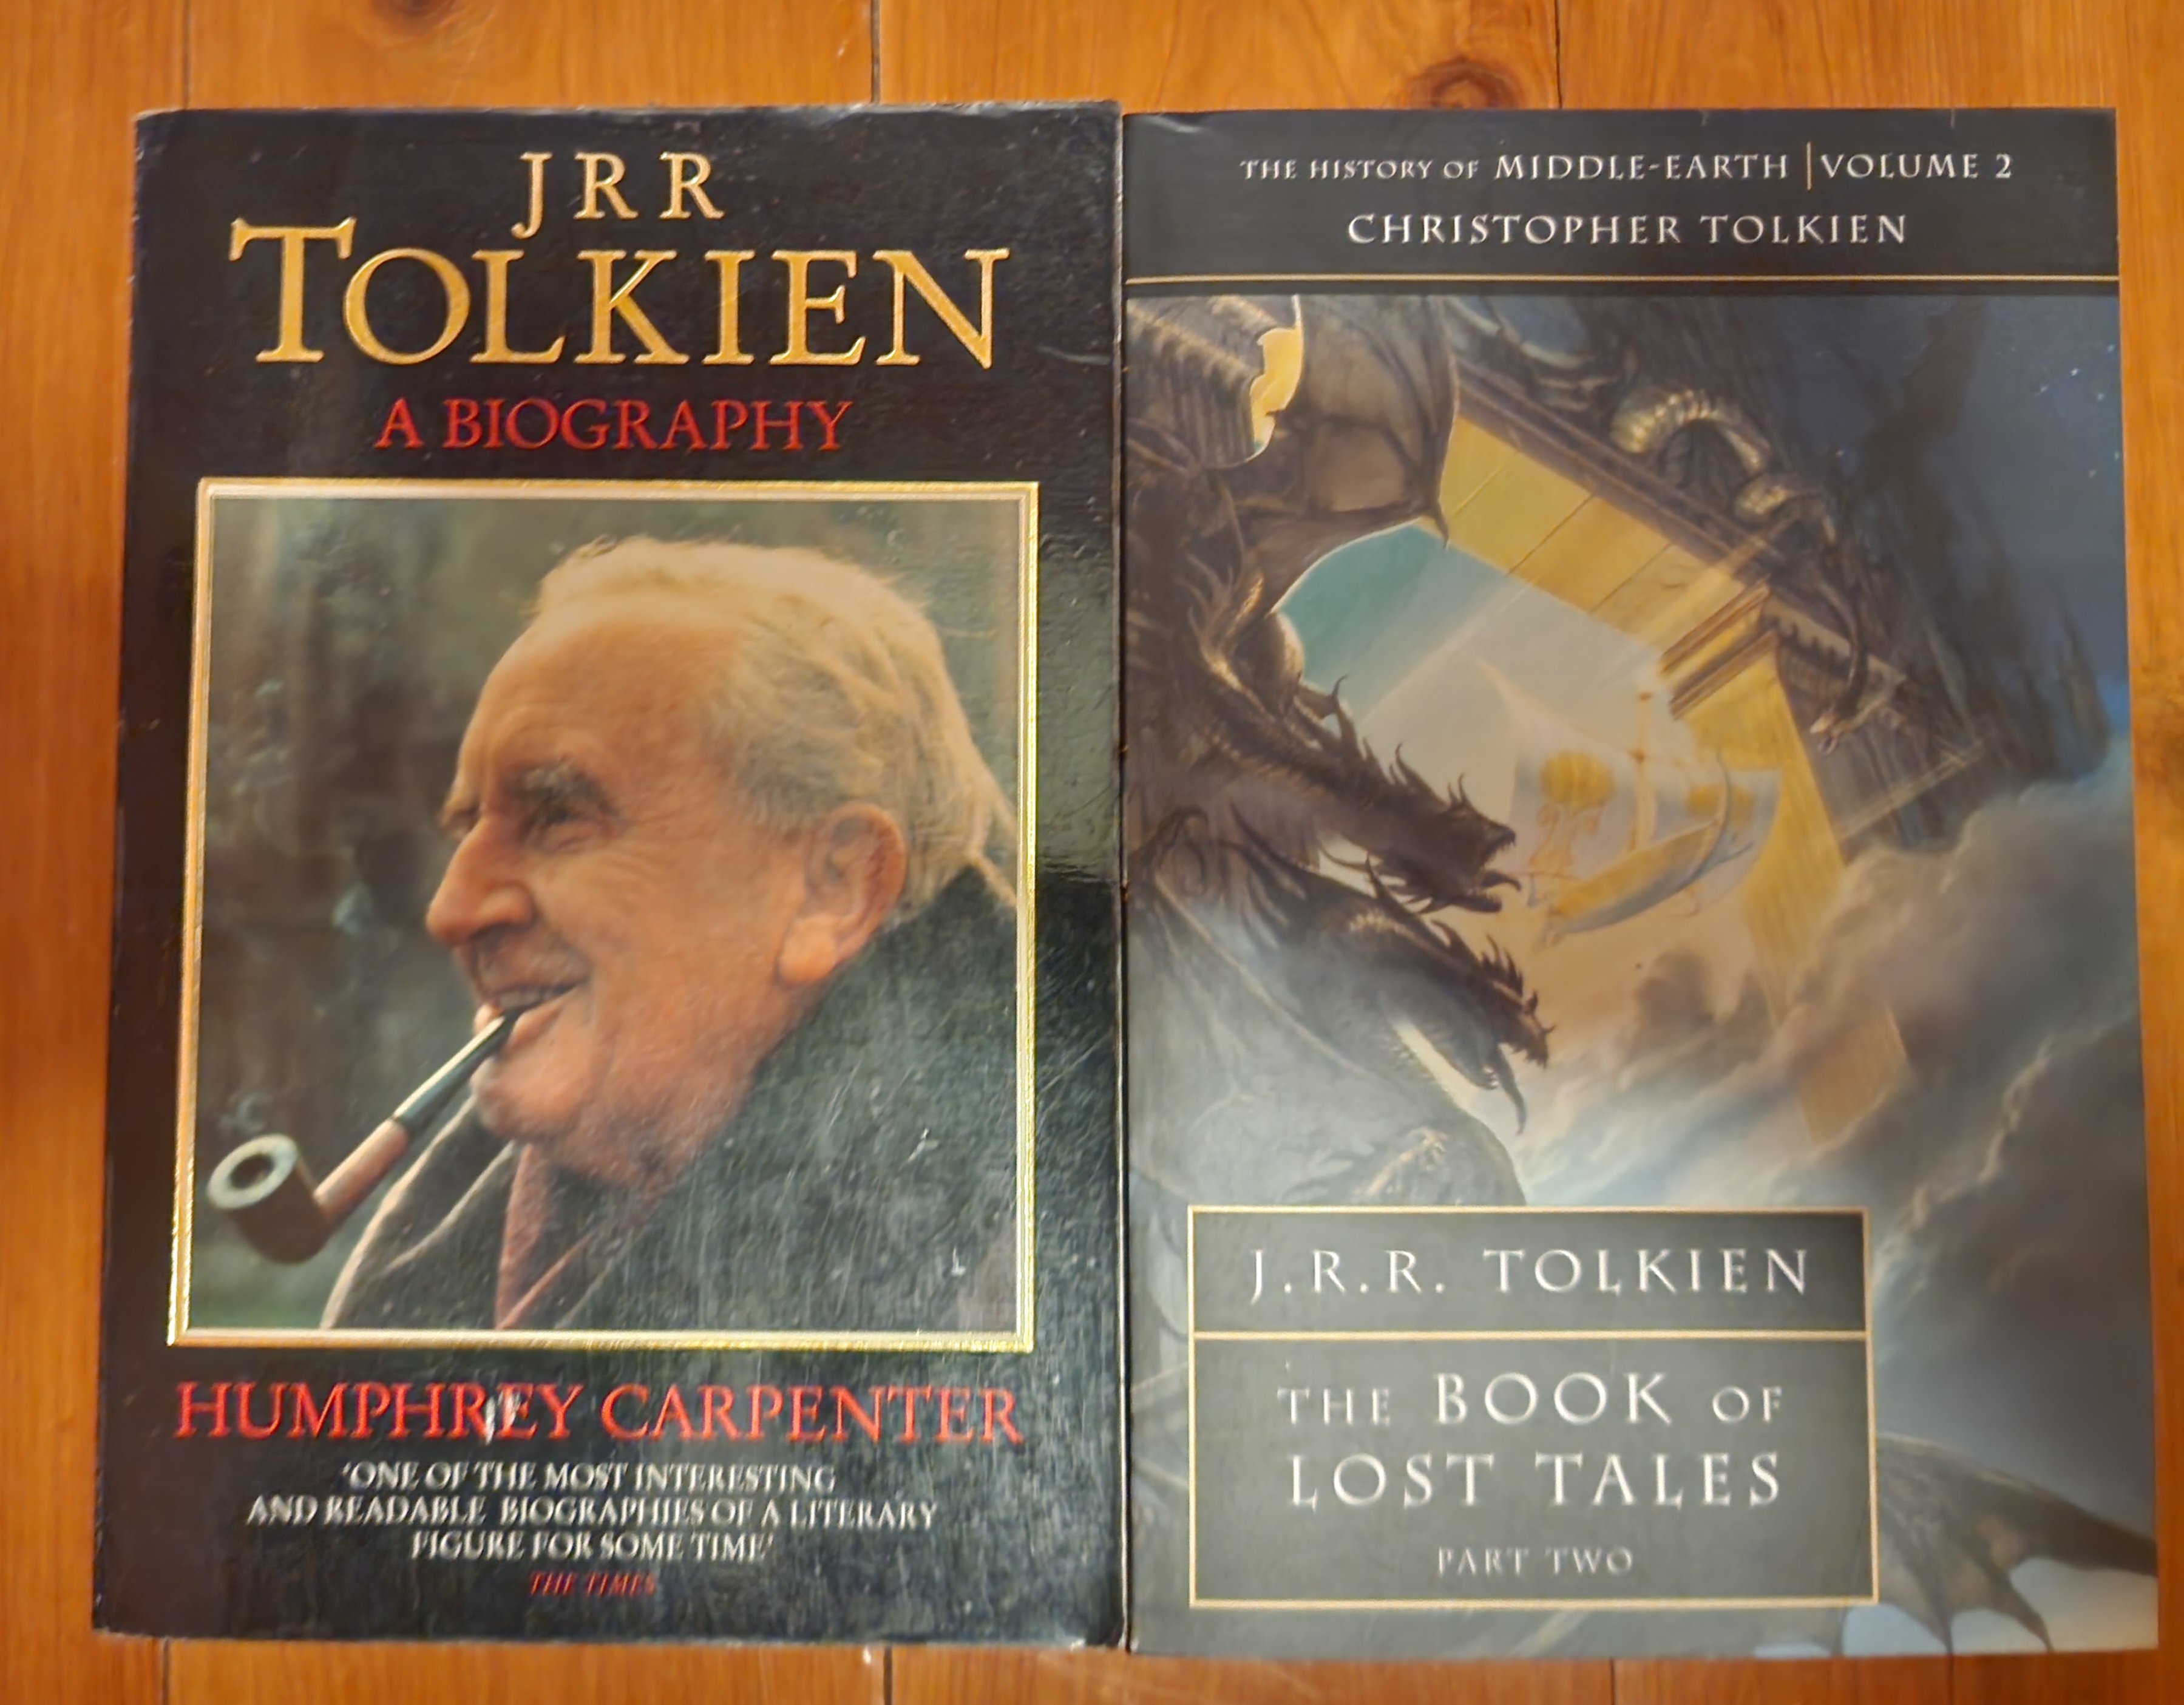 J.R.R. Tolkien, Biography, Books, Movies, & Facts